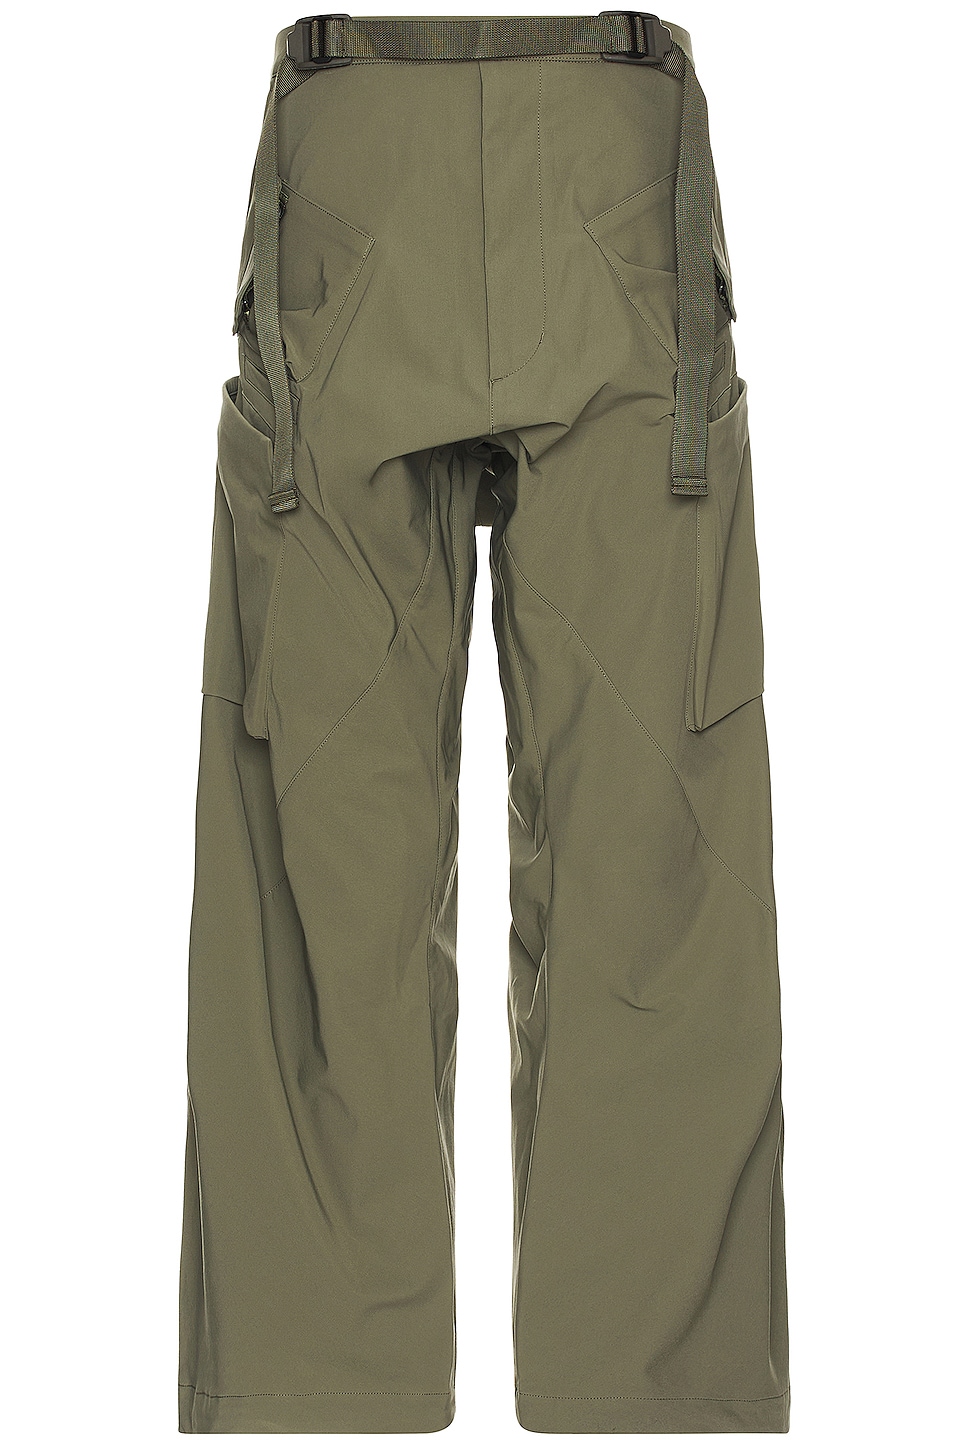 Image 1 of Acronym P30al-ds Schoeller Dryskin Articulated Pant in Alpha Green